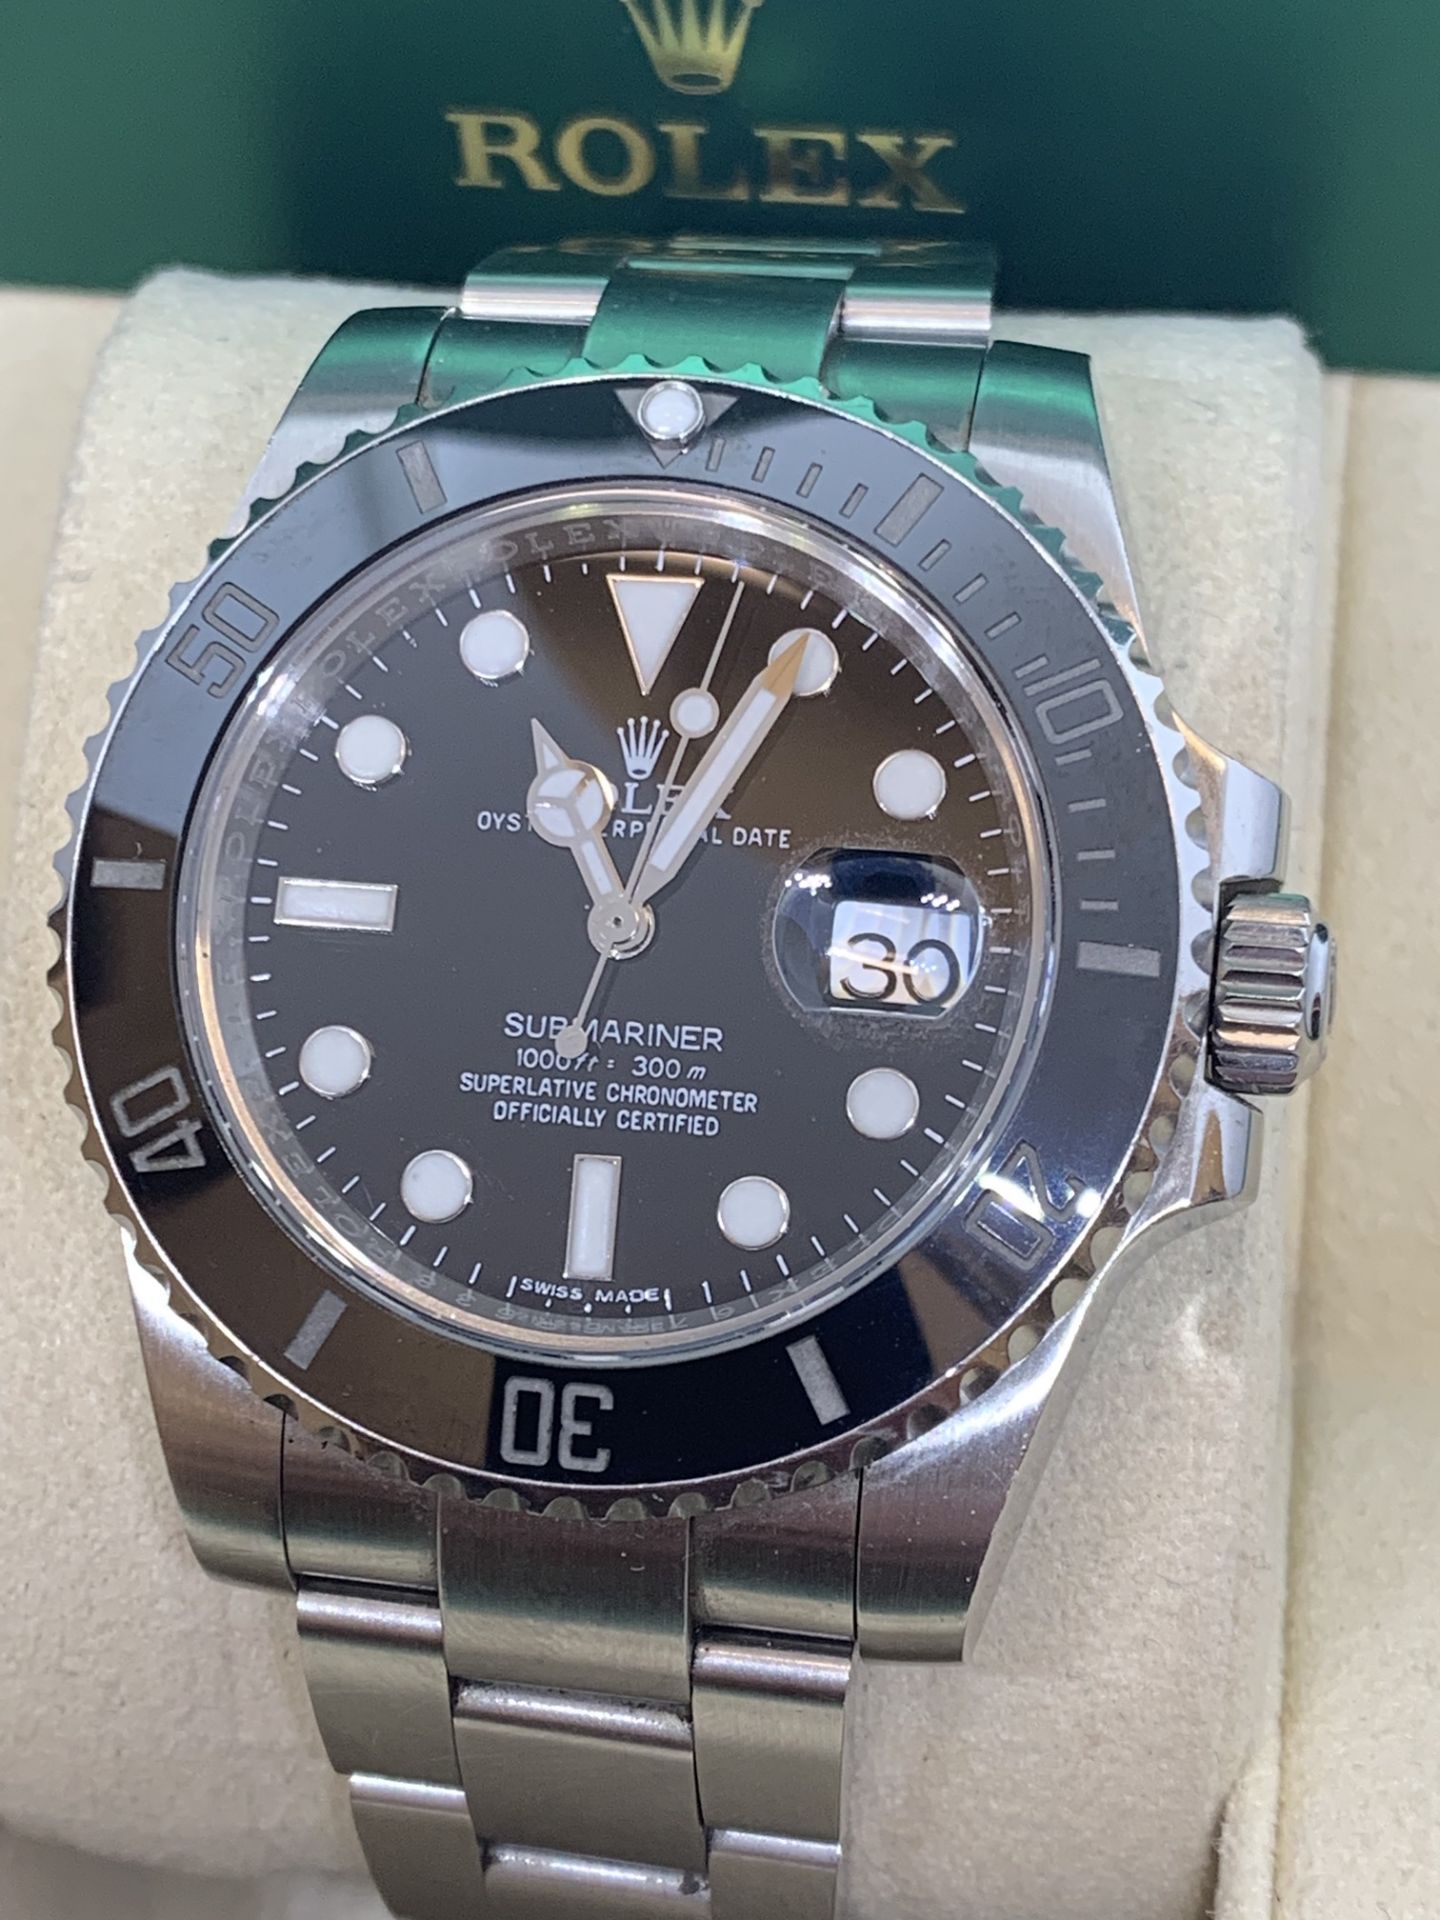 ROLEX SUBMARINER 3135 MOVEMENT WITH S/S METAL WATCH CASE - Image 9 of 13